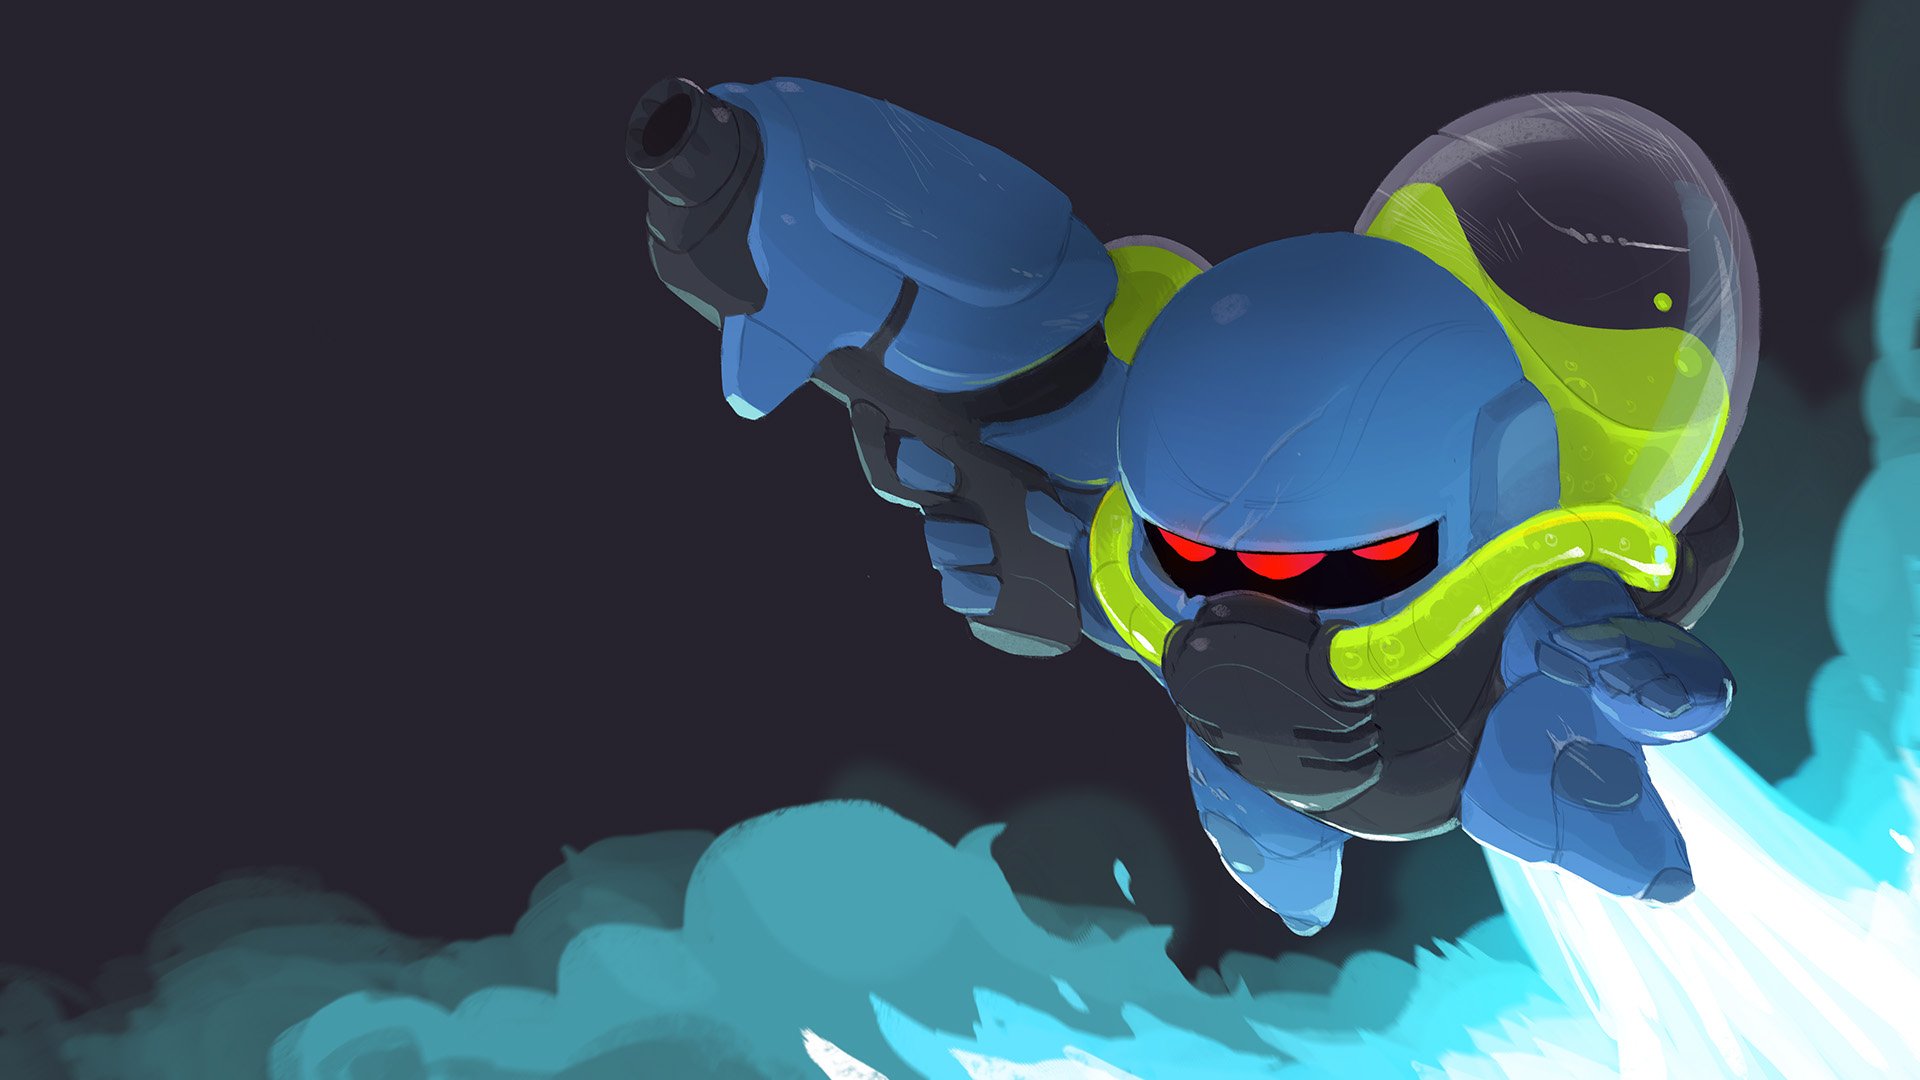 nuclear throne ps3 download